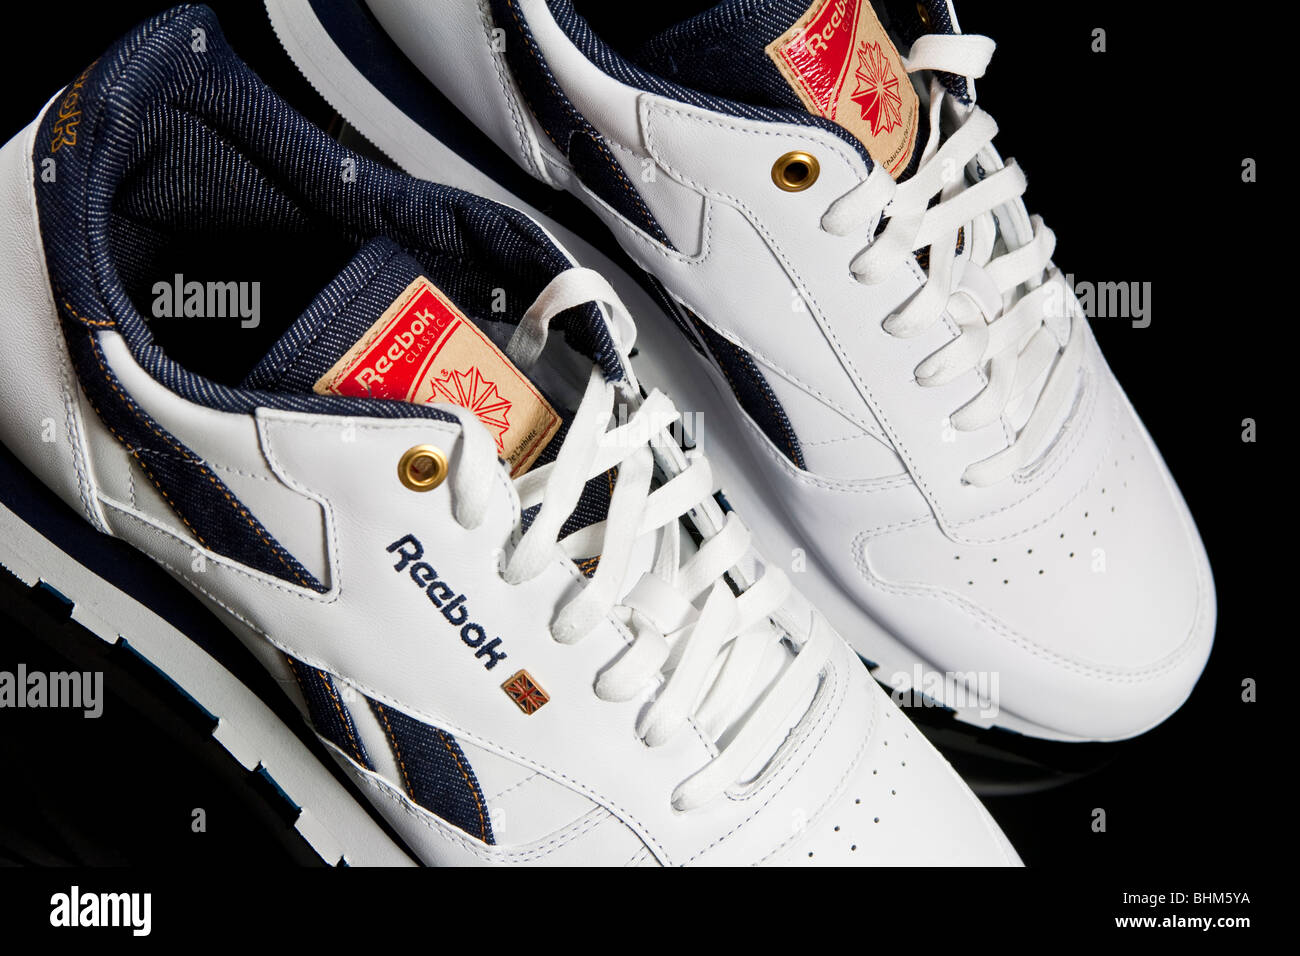 latest collection of reebok shoes